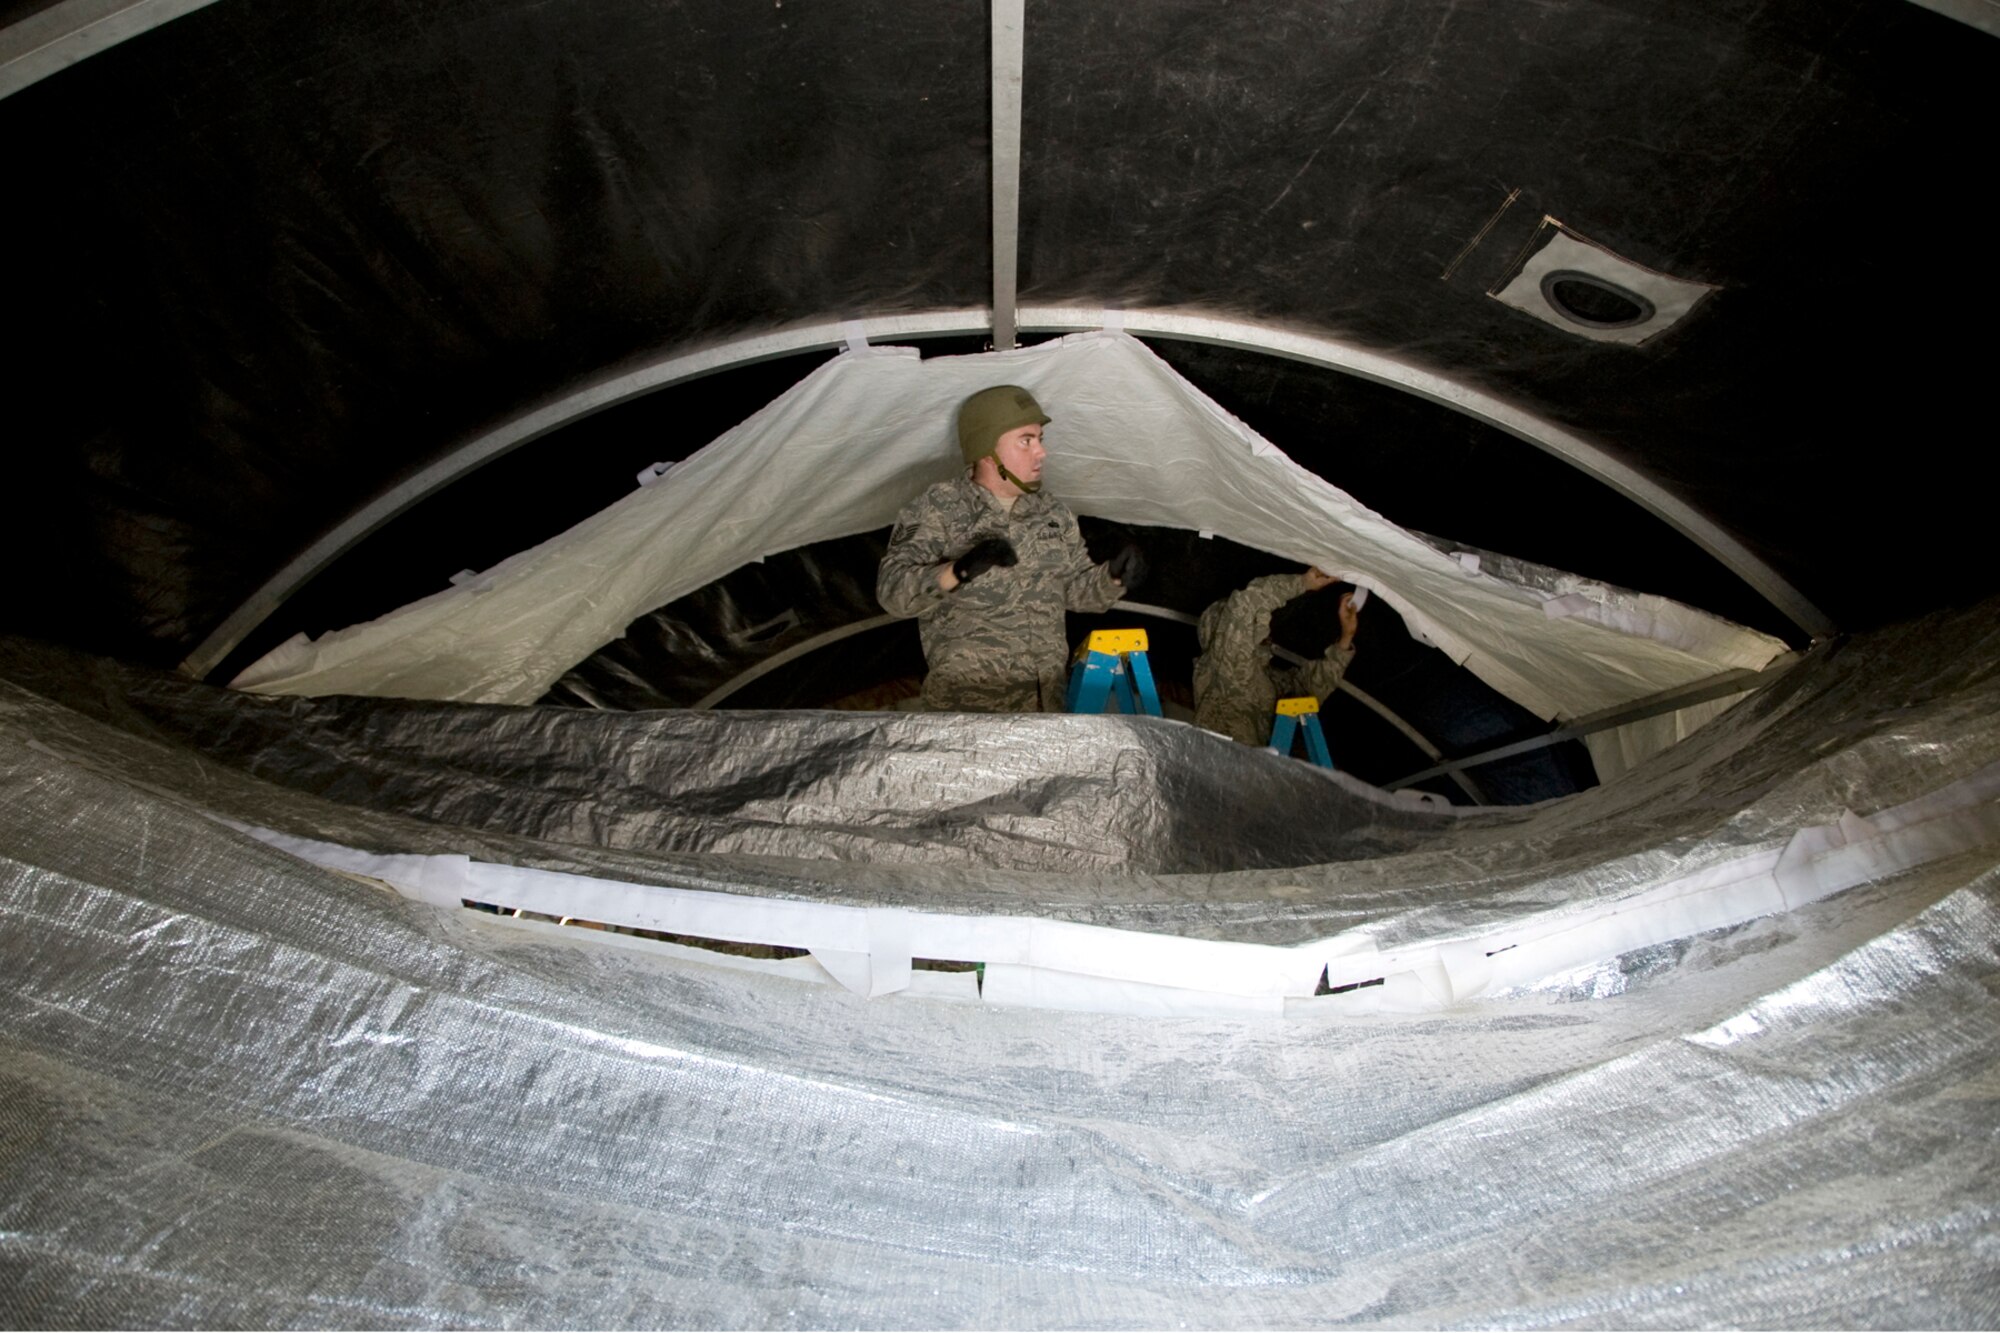 Tech. Sgt. Aaron Alden attaches the insulating liner of the SSS structure during the Silver Flag exercise.  Airmen from the 148th Fighter Wing Force Support Squadron participated in a weeklong contingency operations training exercise from February 18-25 at Dobbins Air Reserve Base.  (U.S. Air Force photo by Staff Sgt. Paul Santikko)

http://www.minnesotanationalguard.org/press_room/e-zine/articles/index.php?item=3688